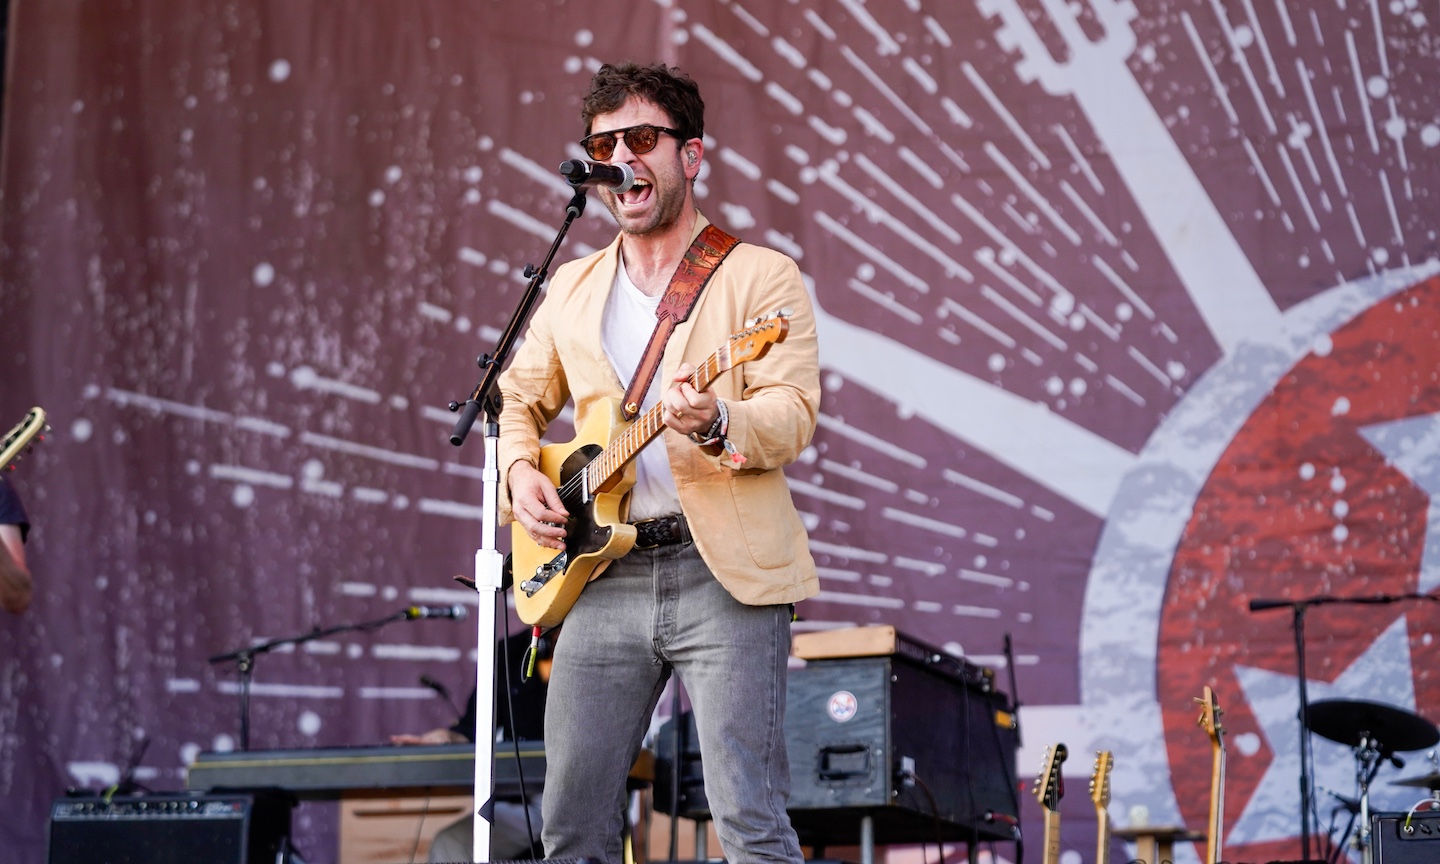 Dawes Announces ‘An Evening With...’ US Headlining Tour